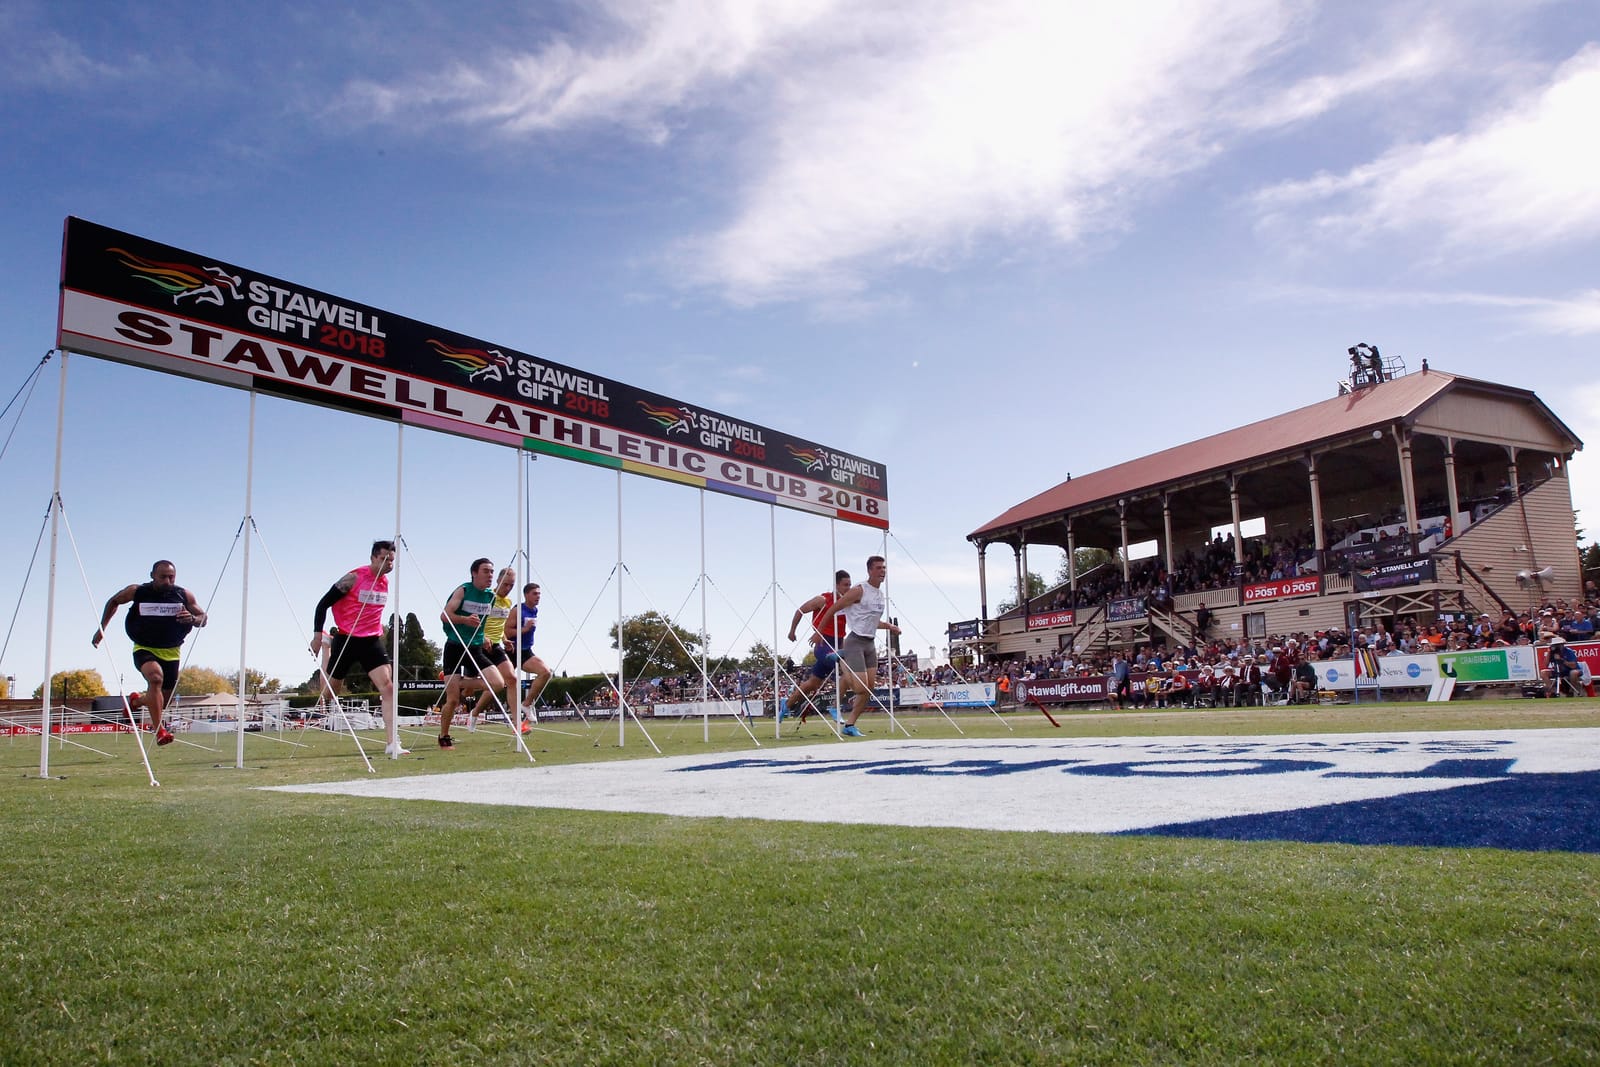 Stawell Gift promotors ban wagering on iconic Easter athletics event